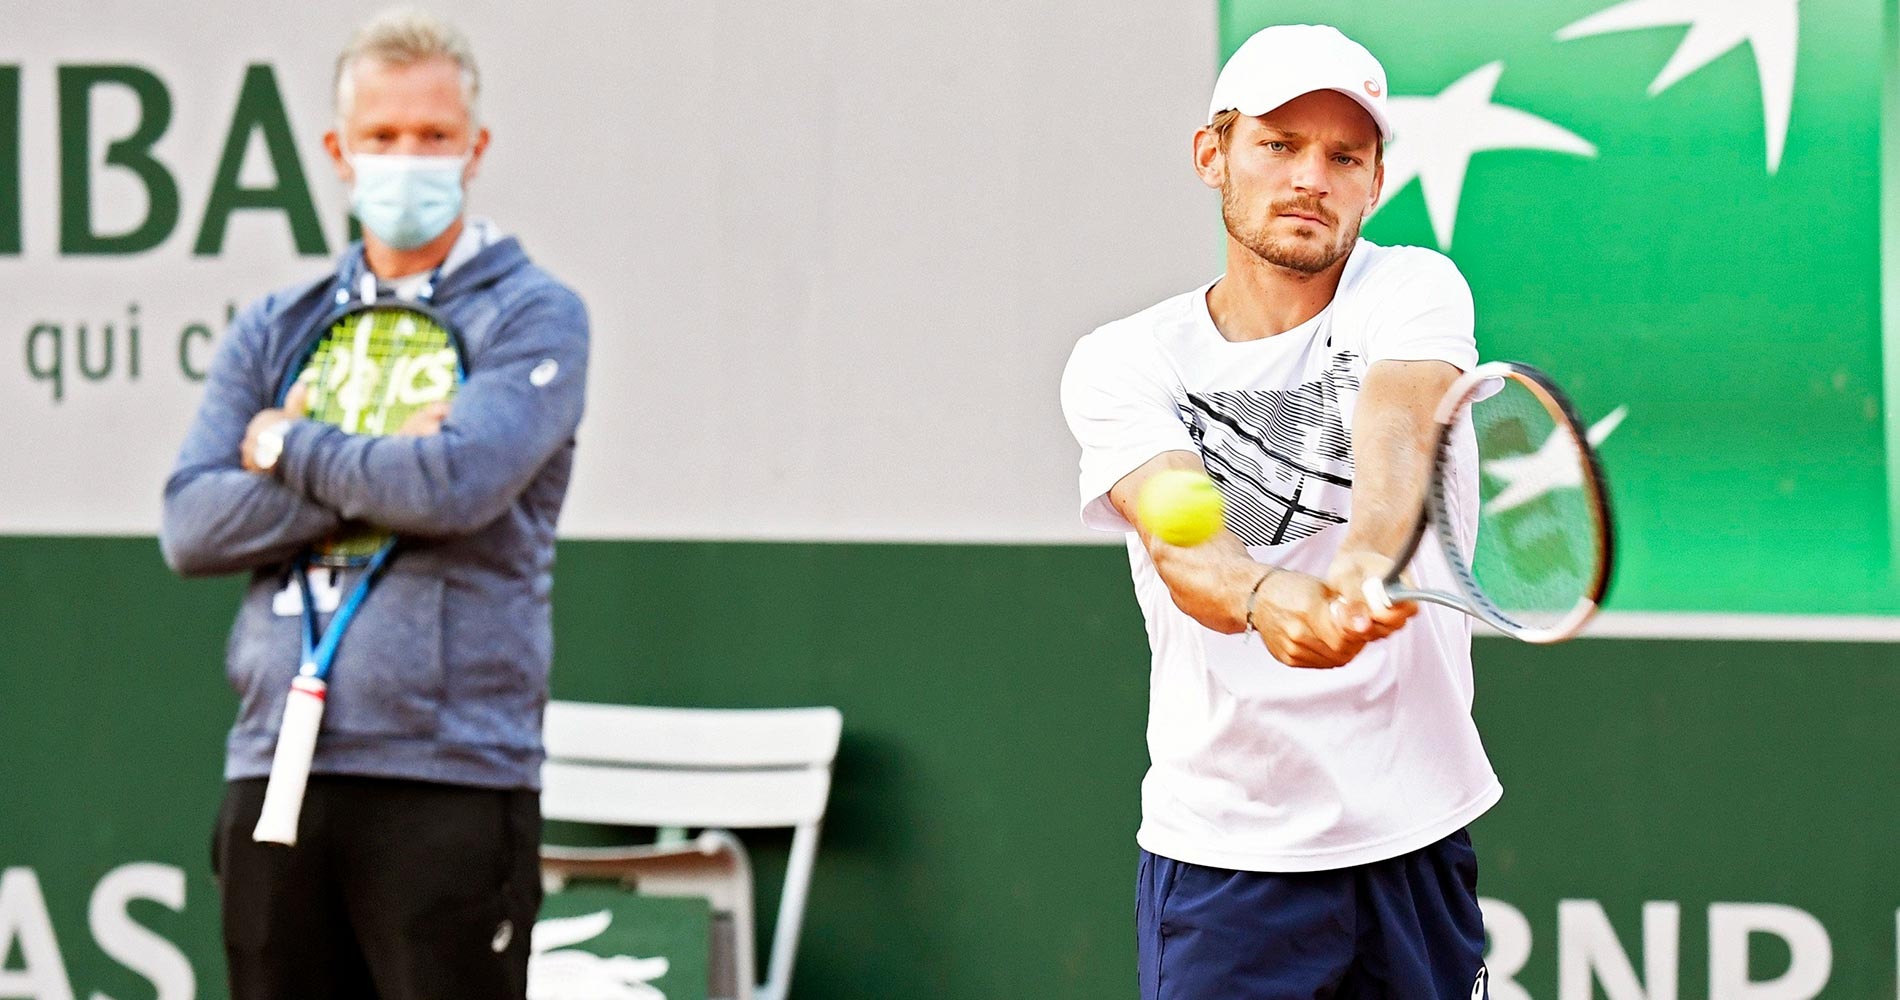 David Goffin with Thomas Johansson looking on